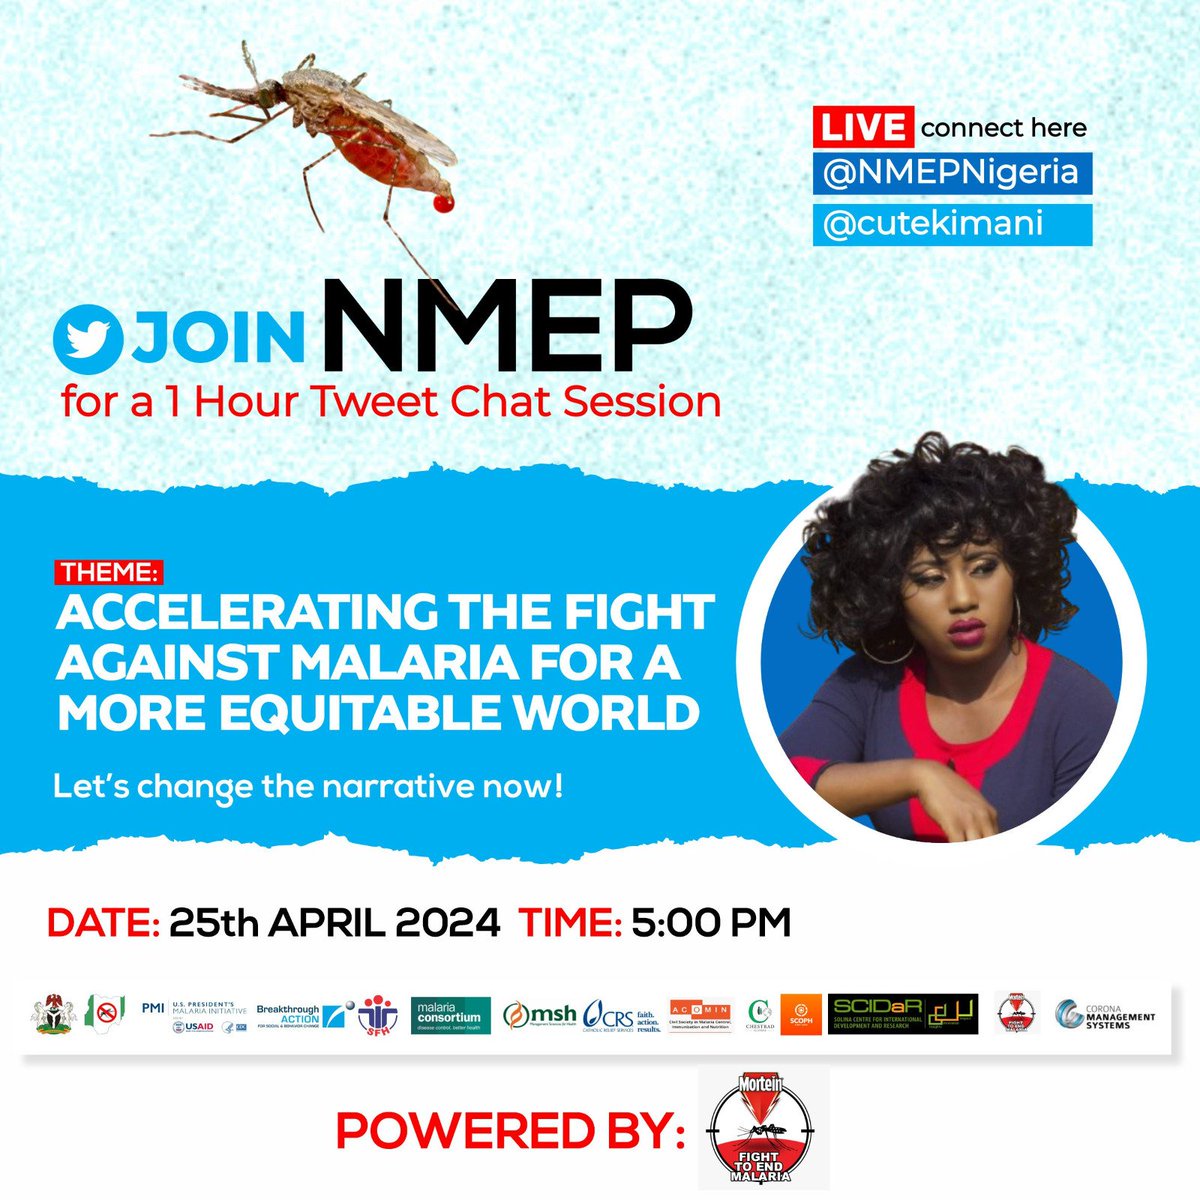 Guys, Join the 1 hour TweetChat session with @Cutekimani and @NMEPNigeria where they will be discussing 'ACCELERATING THE FIGGT AGAINST MALARIA FOR A MORE EQUITABLE WORLD'

Don't miss it

Time: 5 Pm 
Date: 25th, April 2024
#2024WMD 
#ZeroMalariaStartsWithMe
#KimaniOffAir